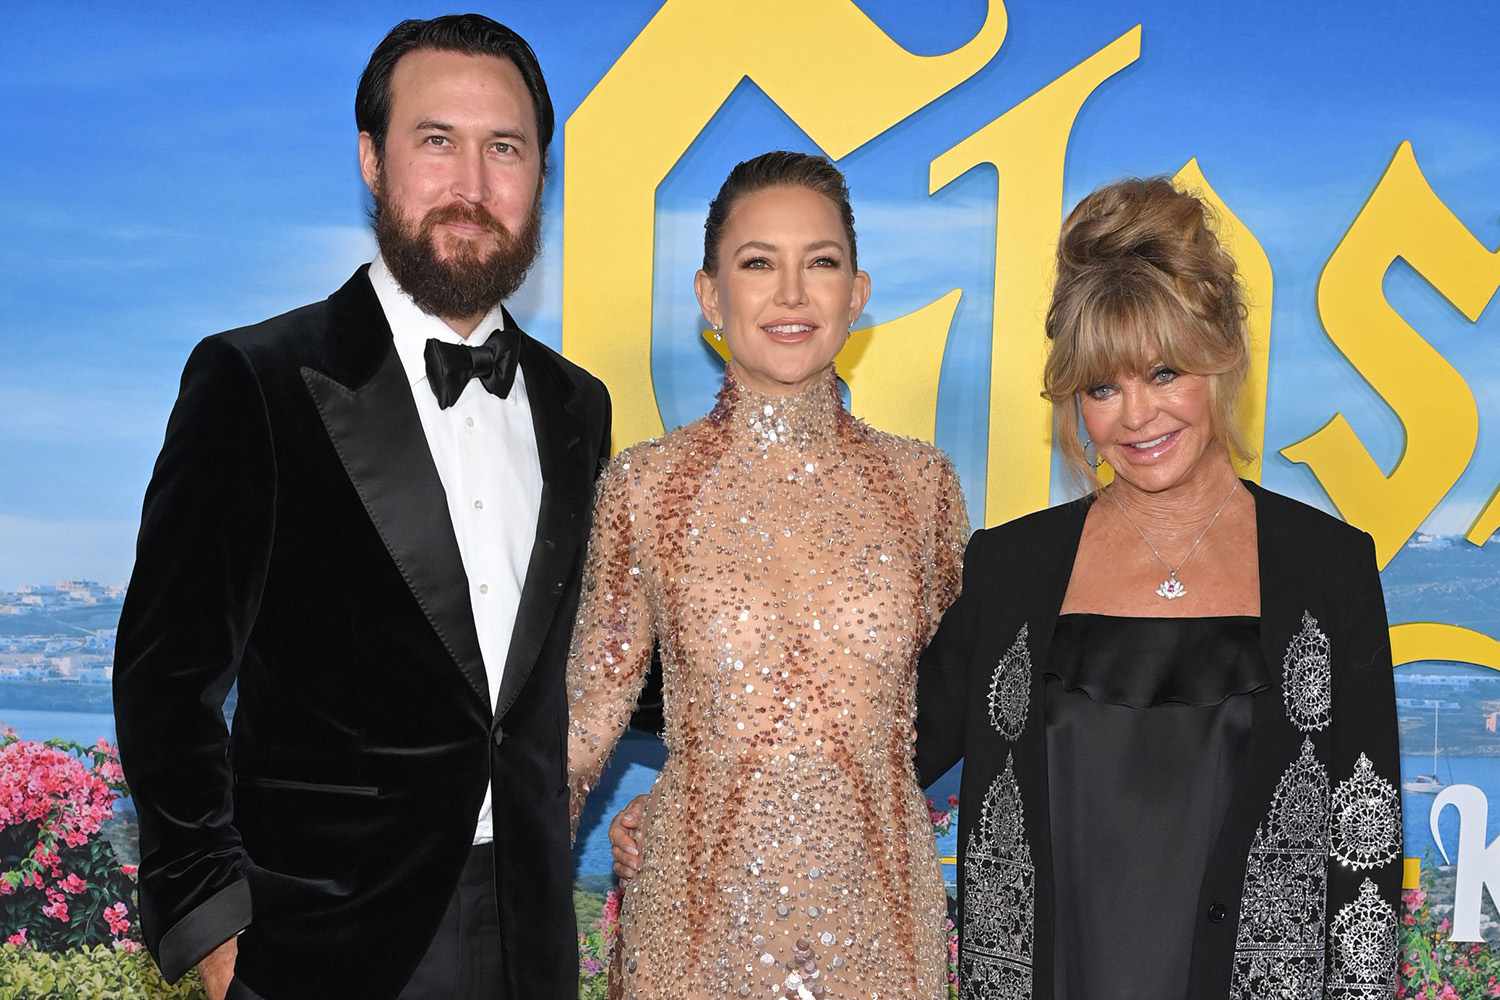 Danny Fujikawa, Kate Hudson and Goldie Hawn 'Glass Onion: A Knives Out Mystery' film premiere